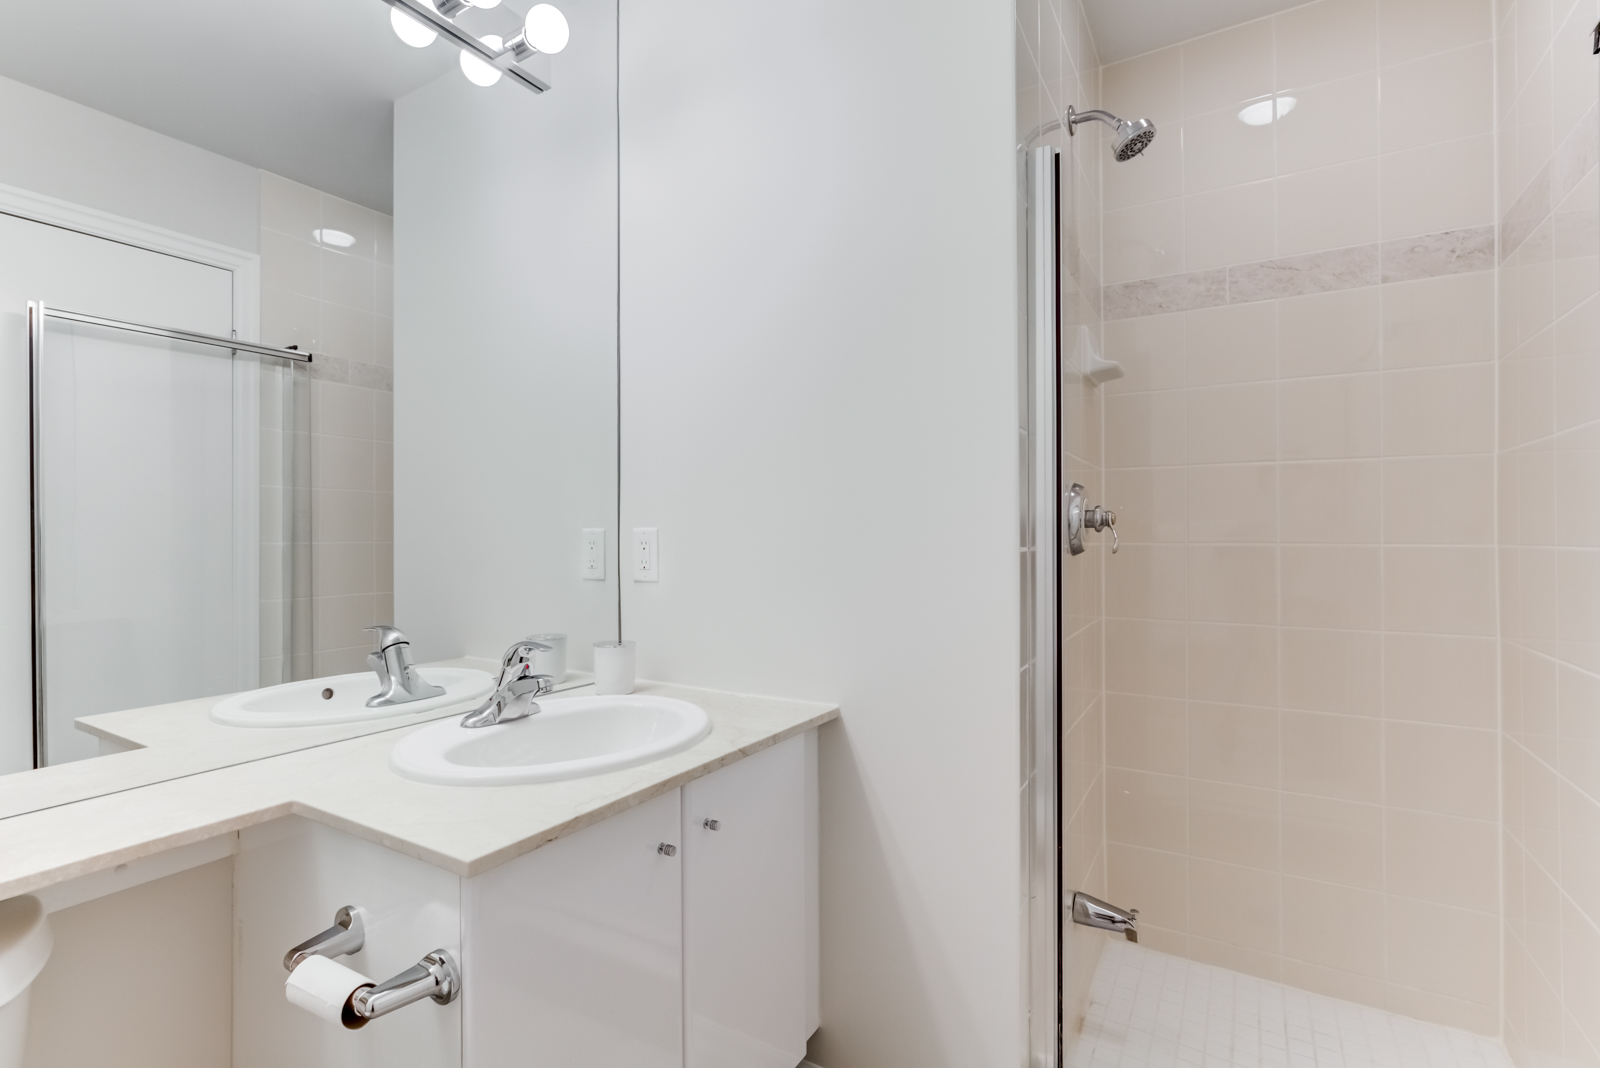 Small bathroom with walk-in shower, chrome fixtures, beige tiles and white counter-tops.